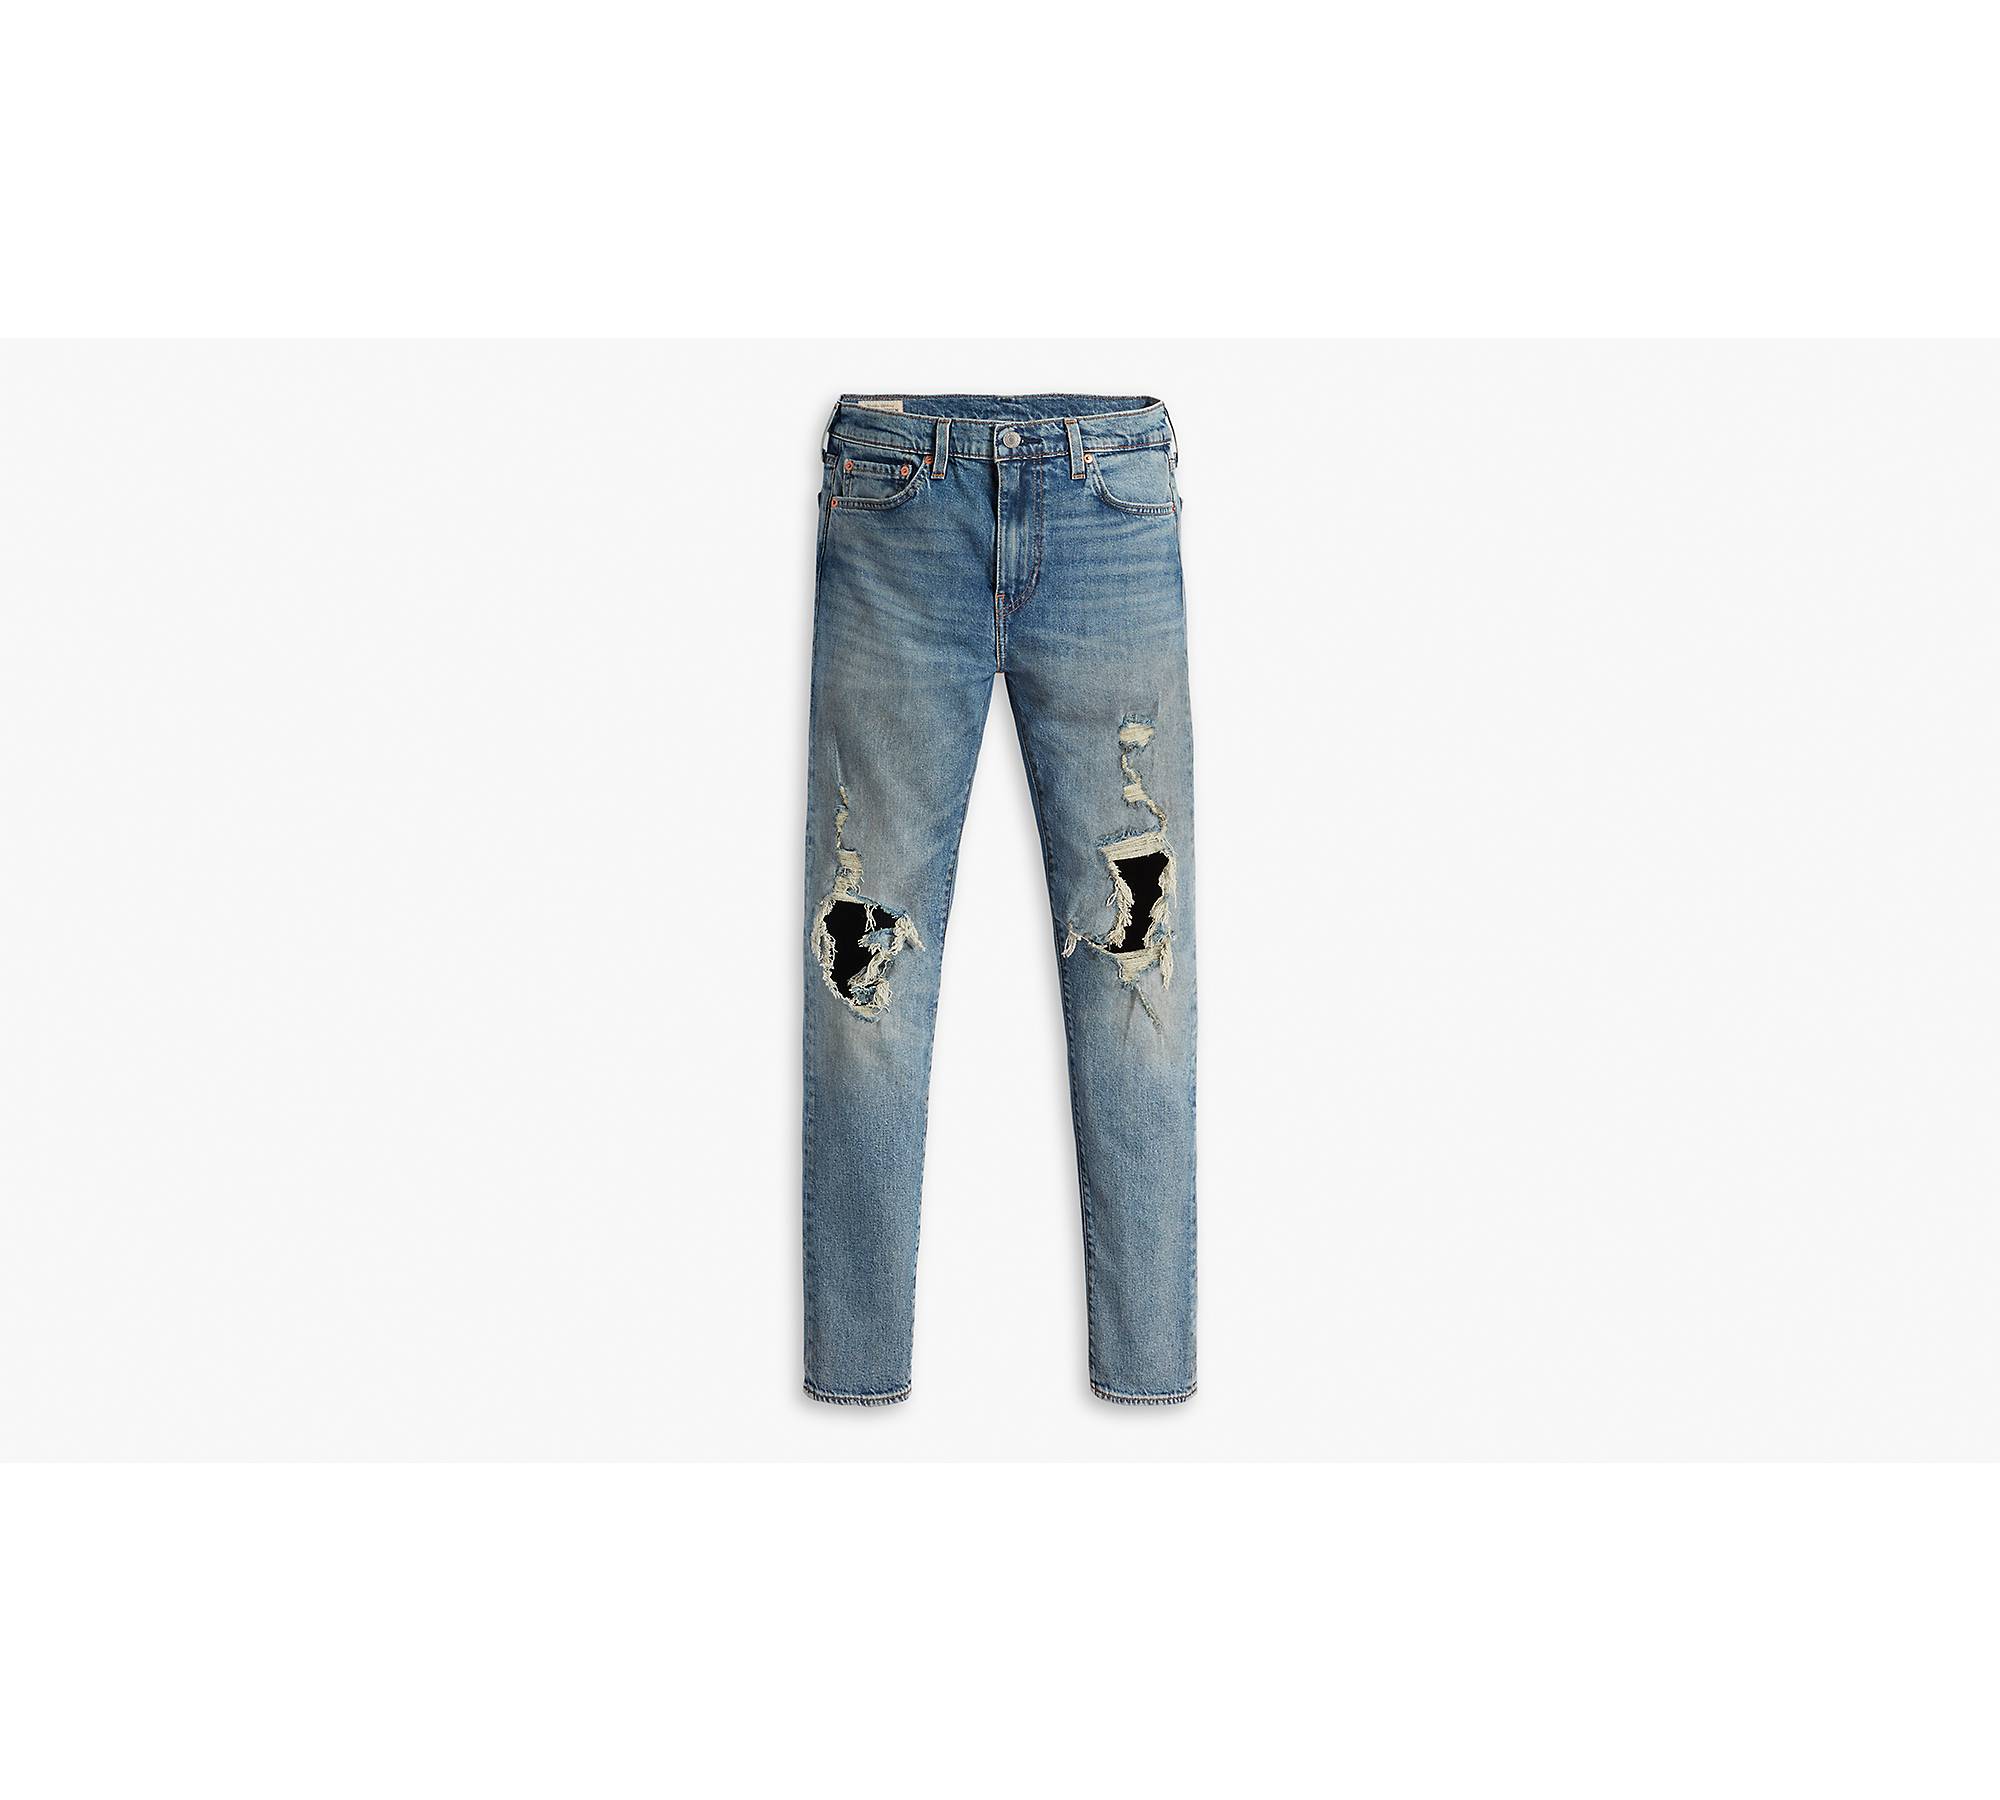 Men Playing Card Patched Ripped Frayed Jeans